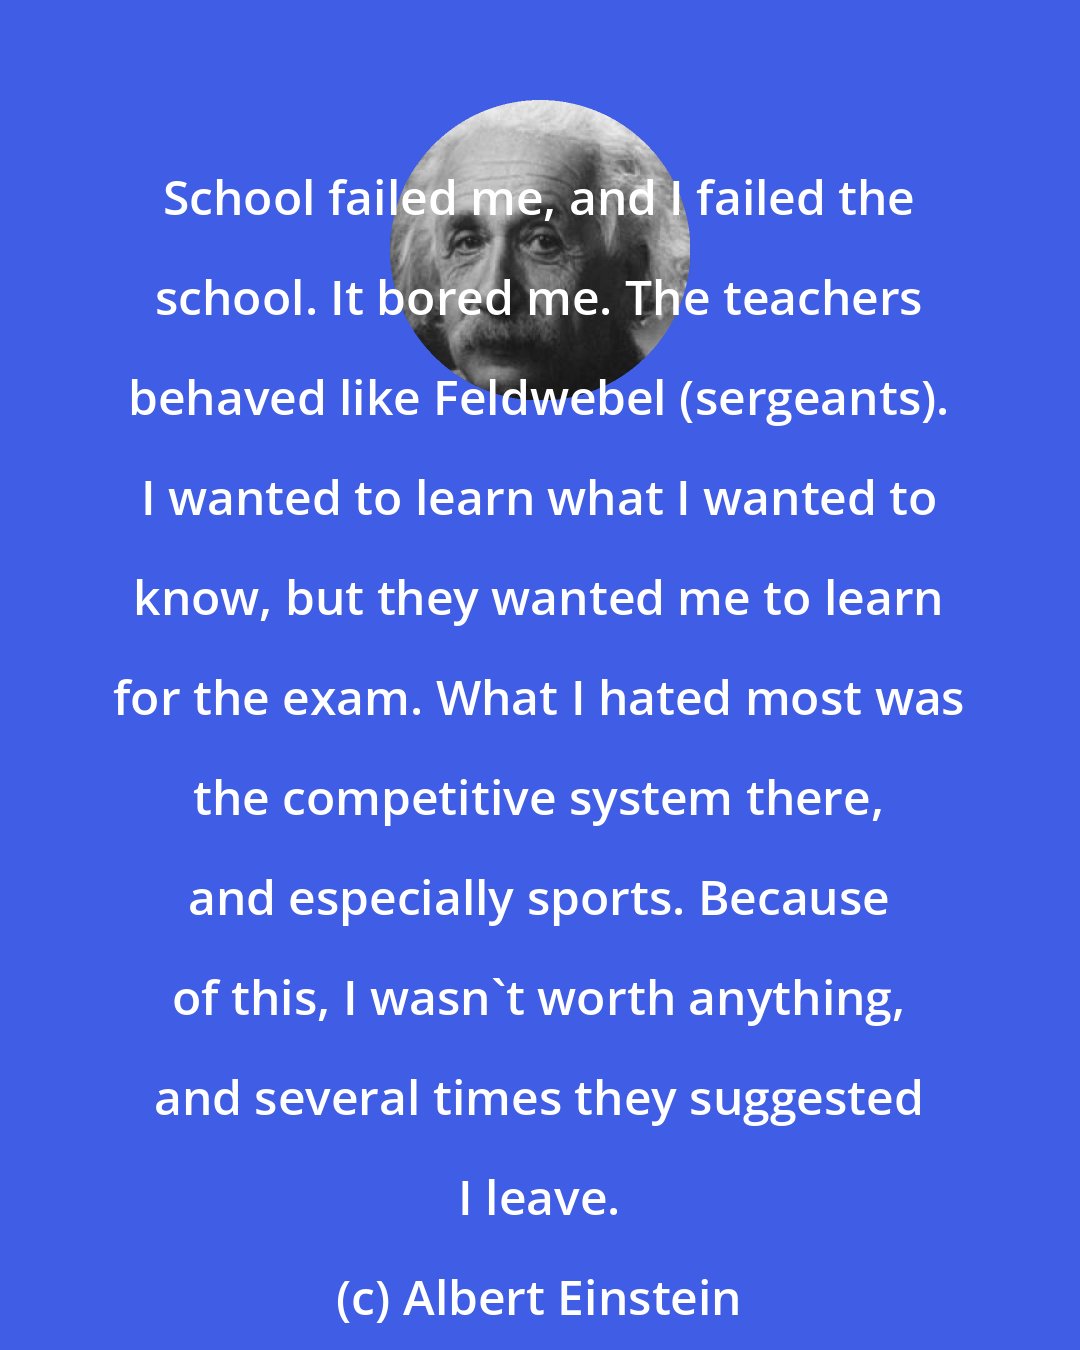 Albert Einstein: School failed me, and I failed the school. It bored me. The teachers behaved like Feldwebel (sergeants). I wanted to learn what I wanted to know, but they wanted me to learn for the exam. What I hated most was the competitive system there, and especially sports. Because of this, I wasn't worth anything, and several times they suggested I leave.